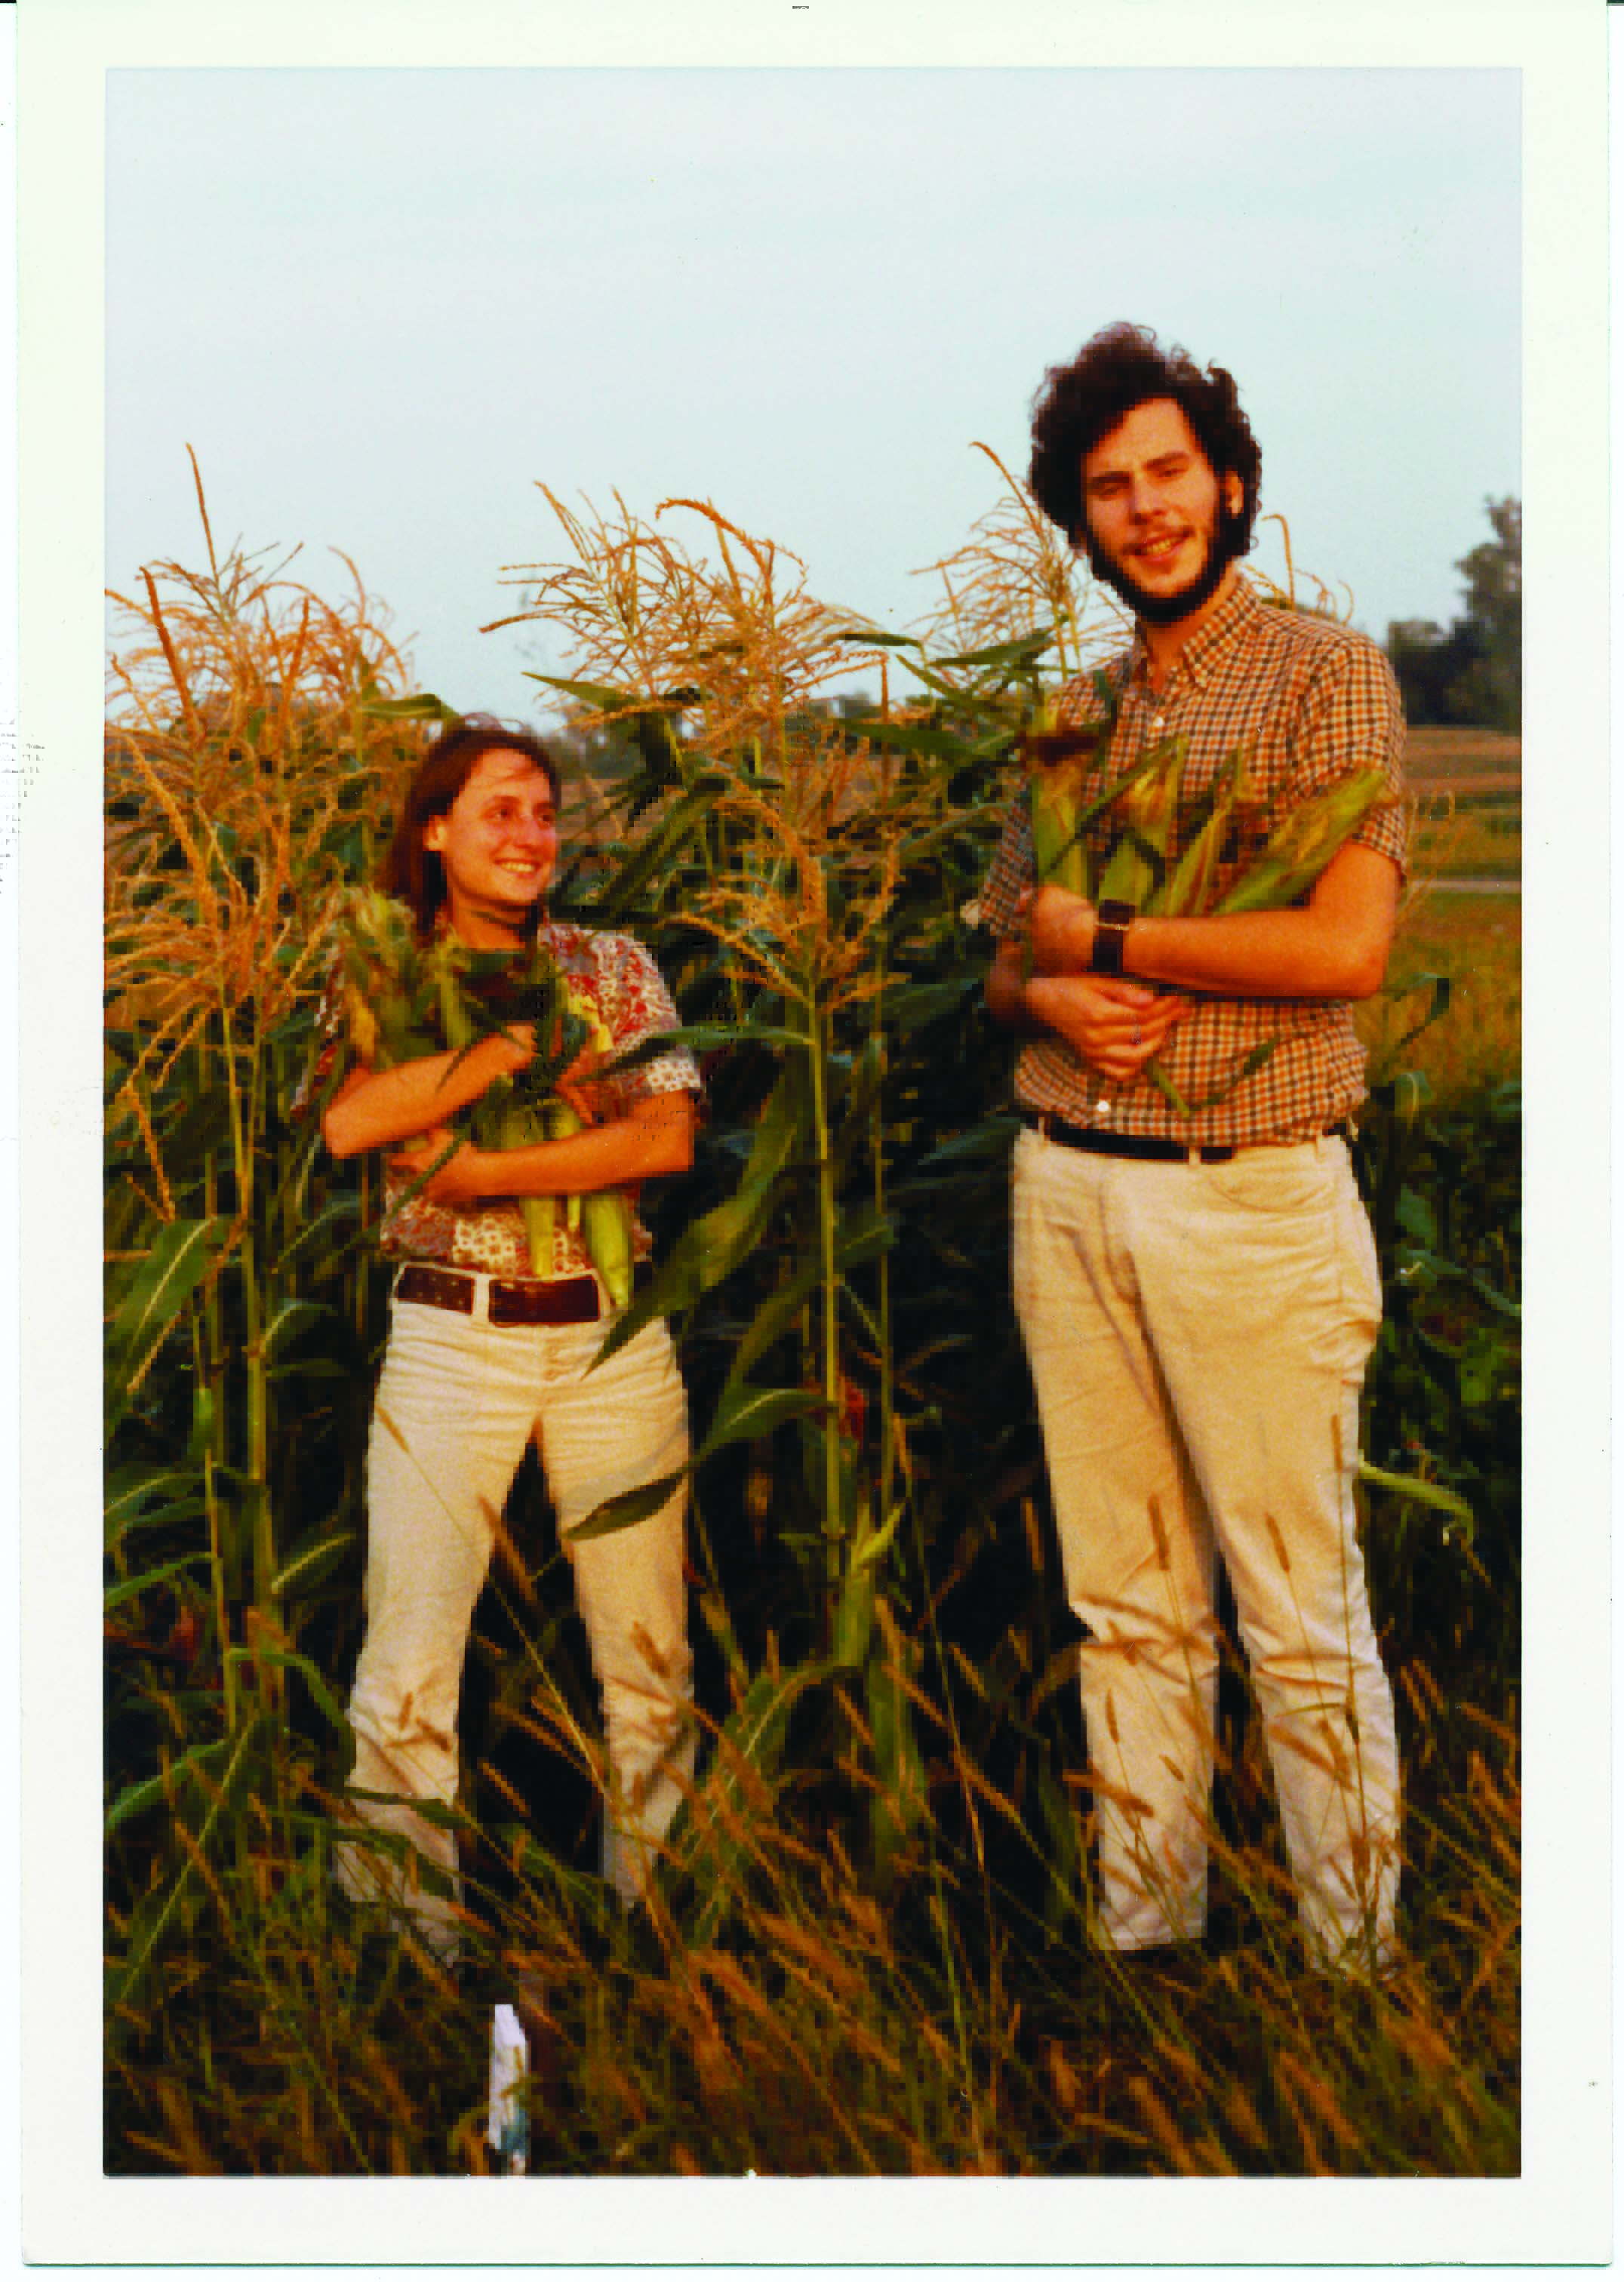 Warren and Amy Belasco harvest corn at their first community garden plot in Ann Arbor, MI, in the early 1970s.